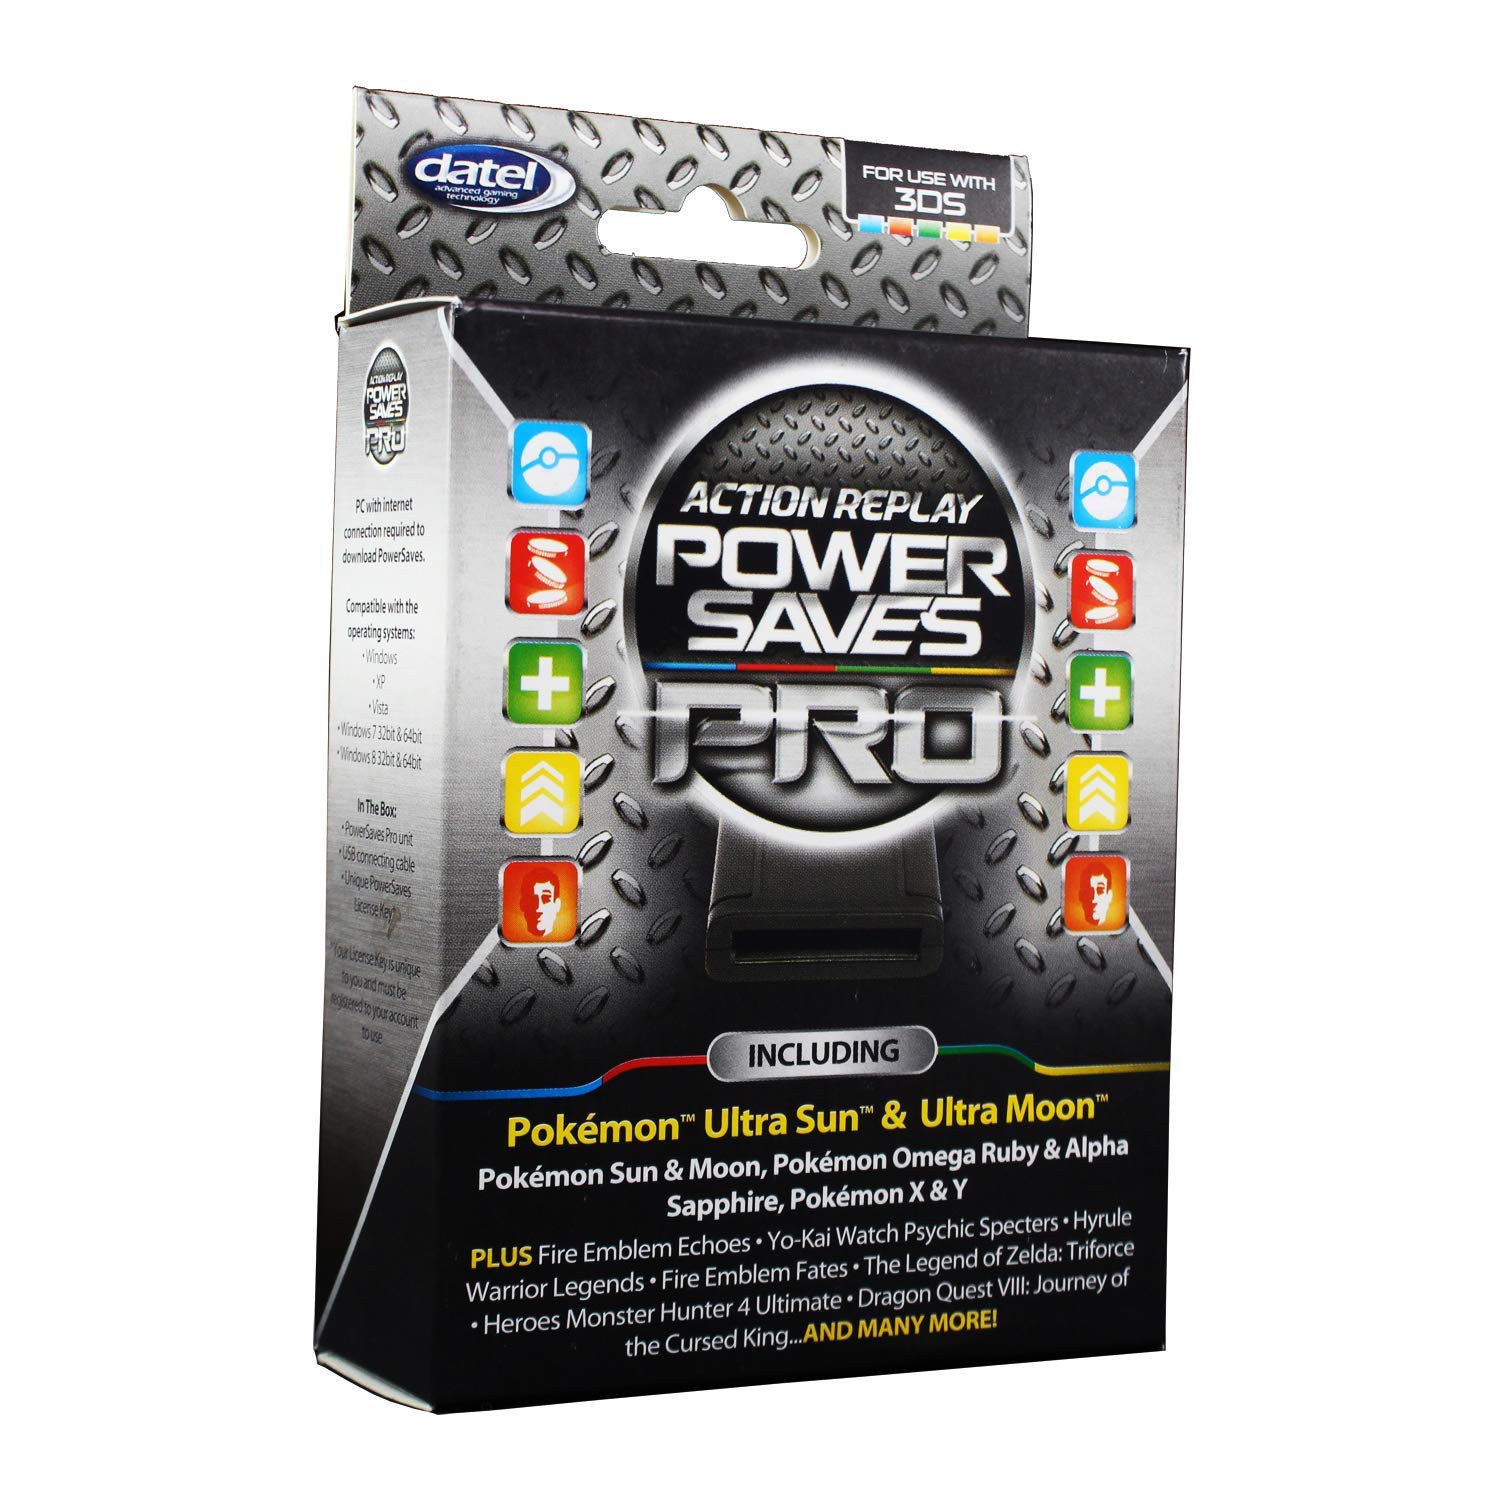 Datel Action Replay Power Saves Pro - Nintendo 3Ds